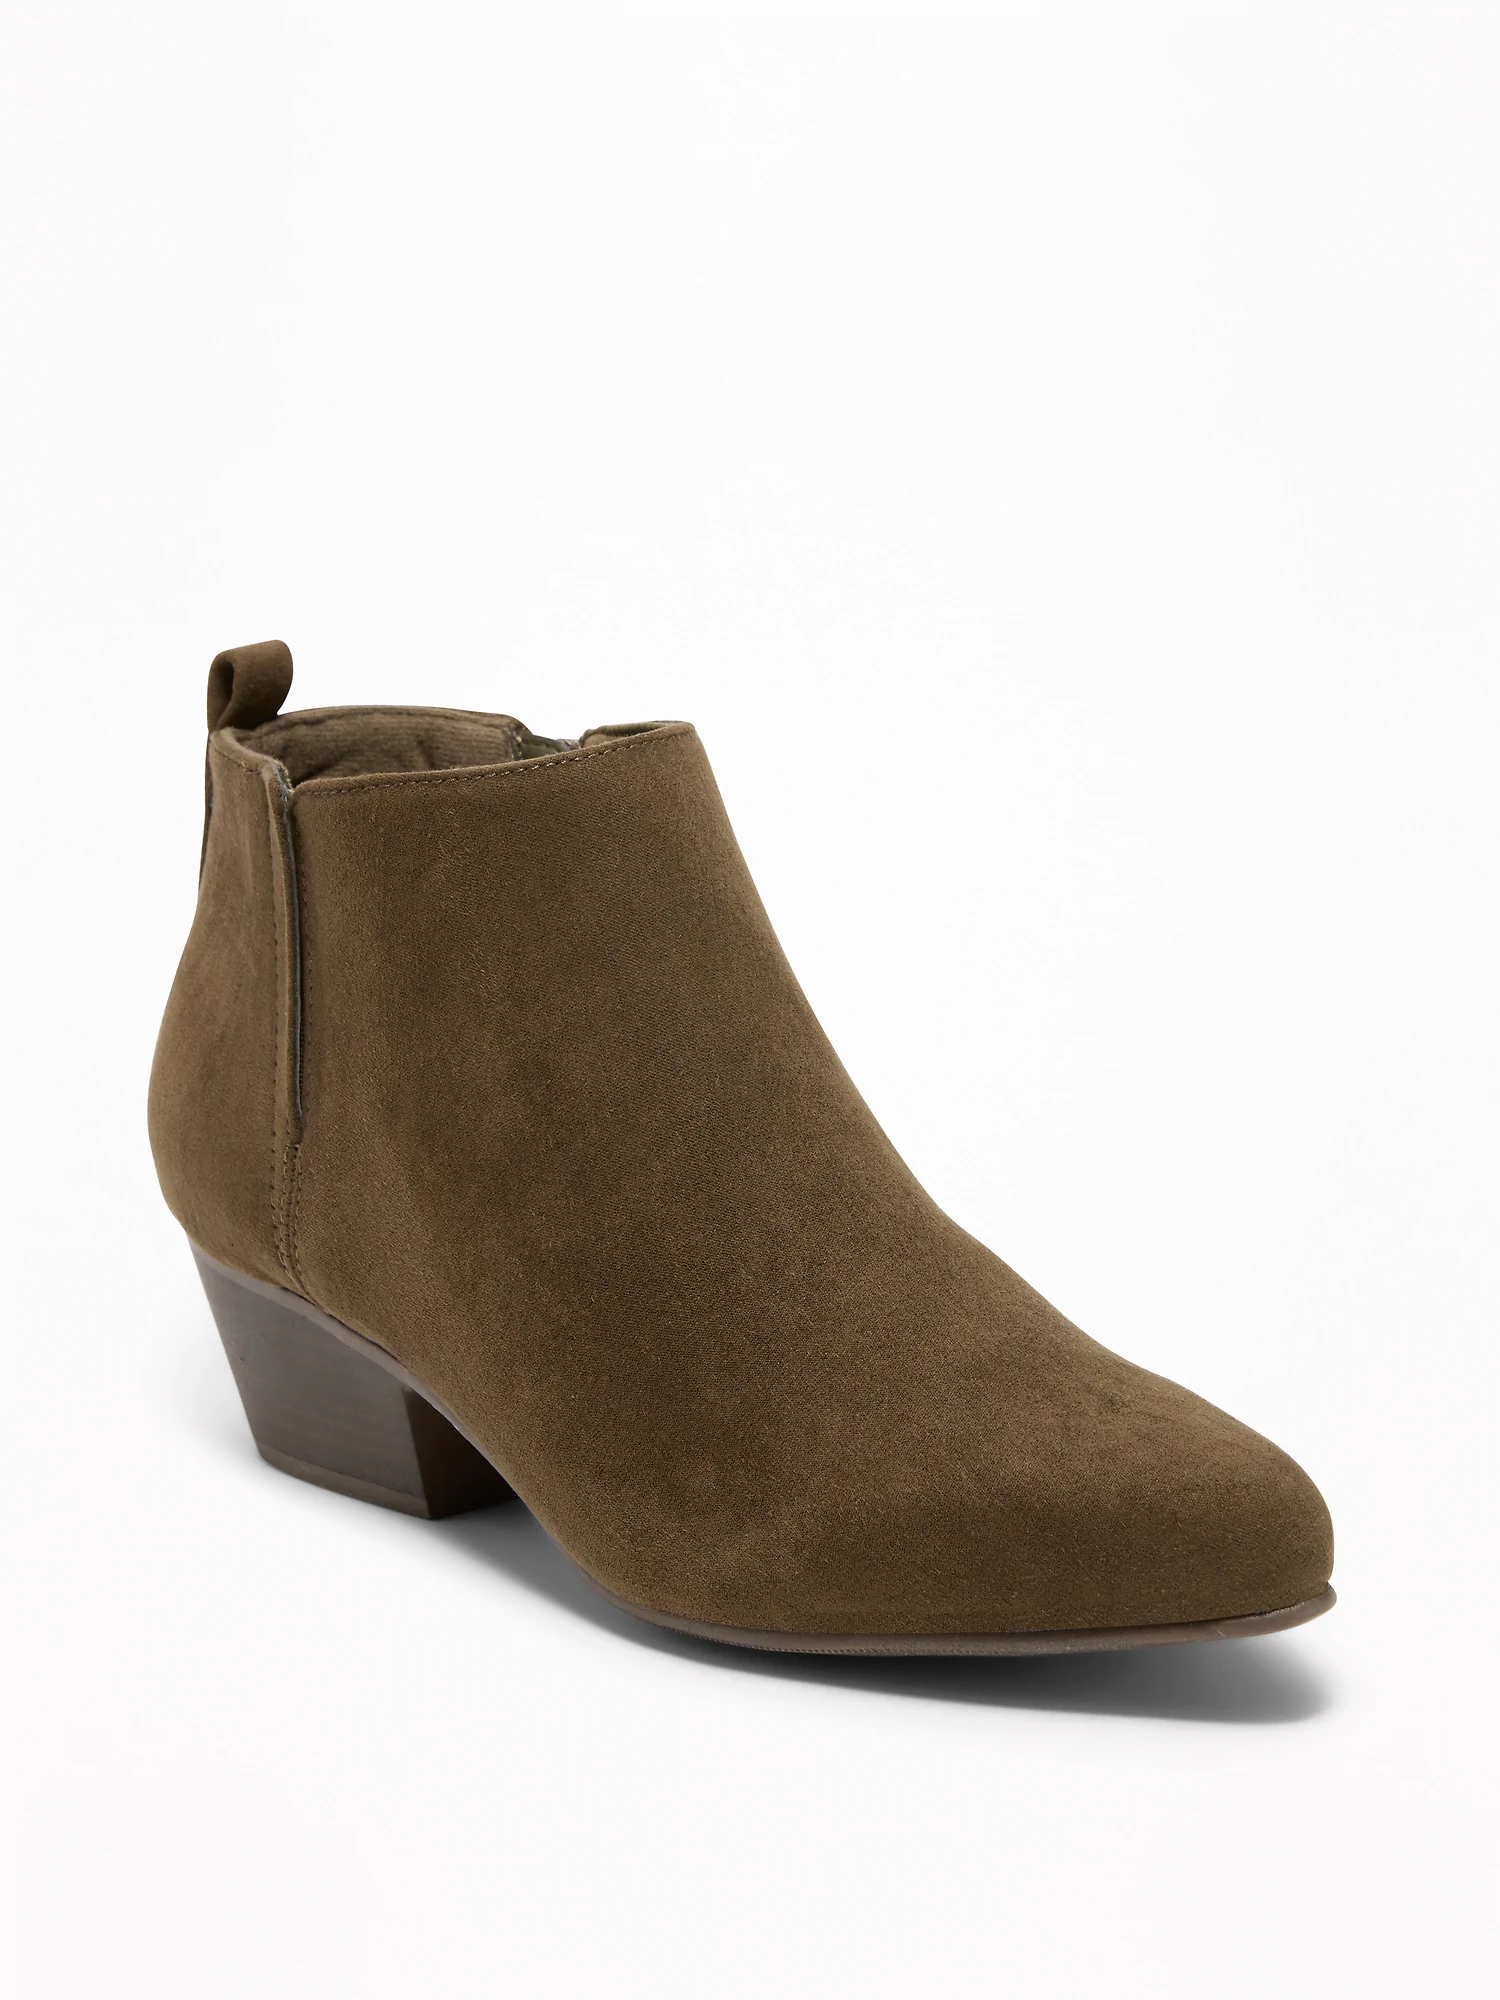 Sueded Ankle Boots for Women - Olive